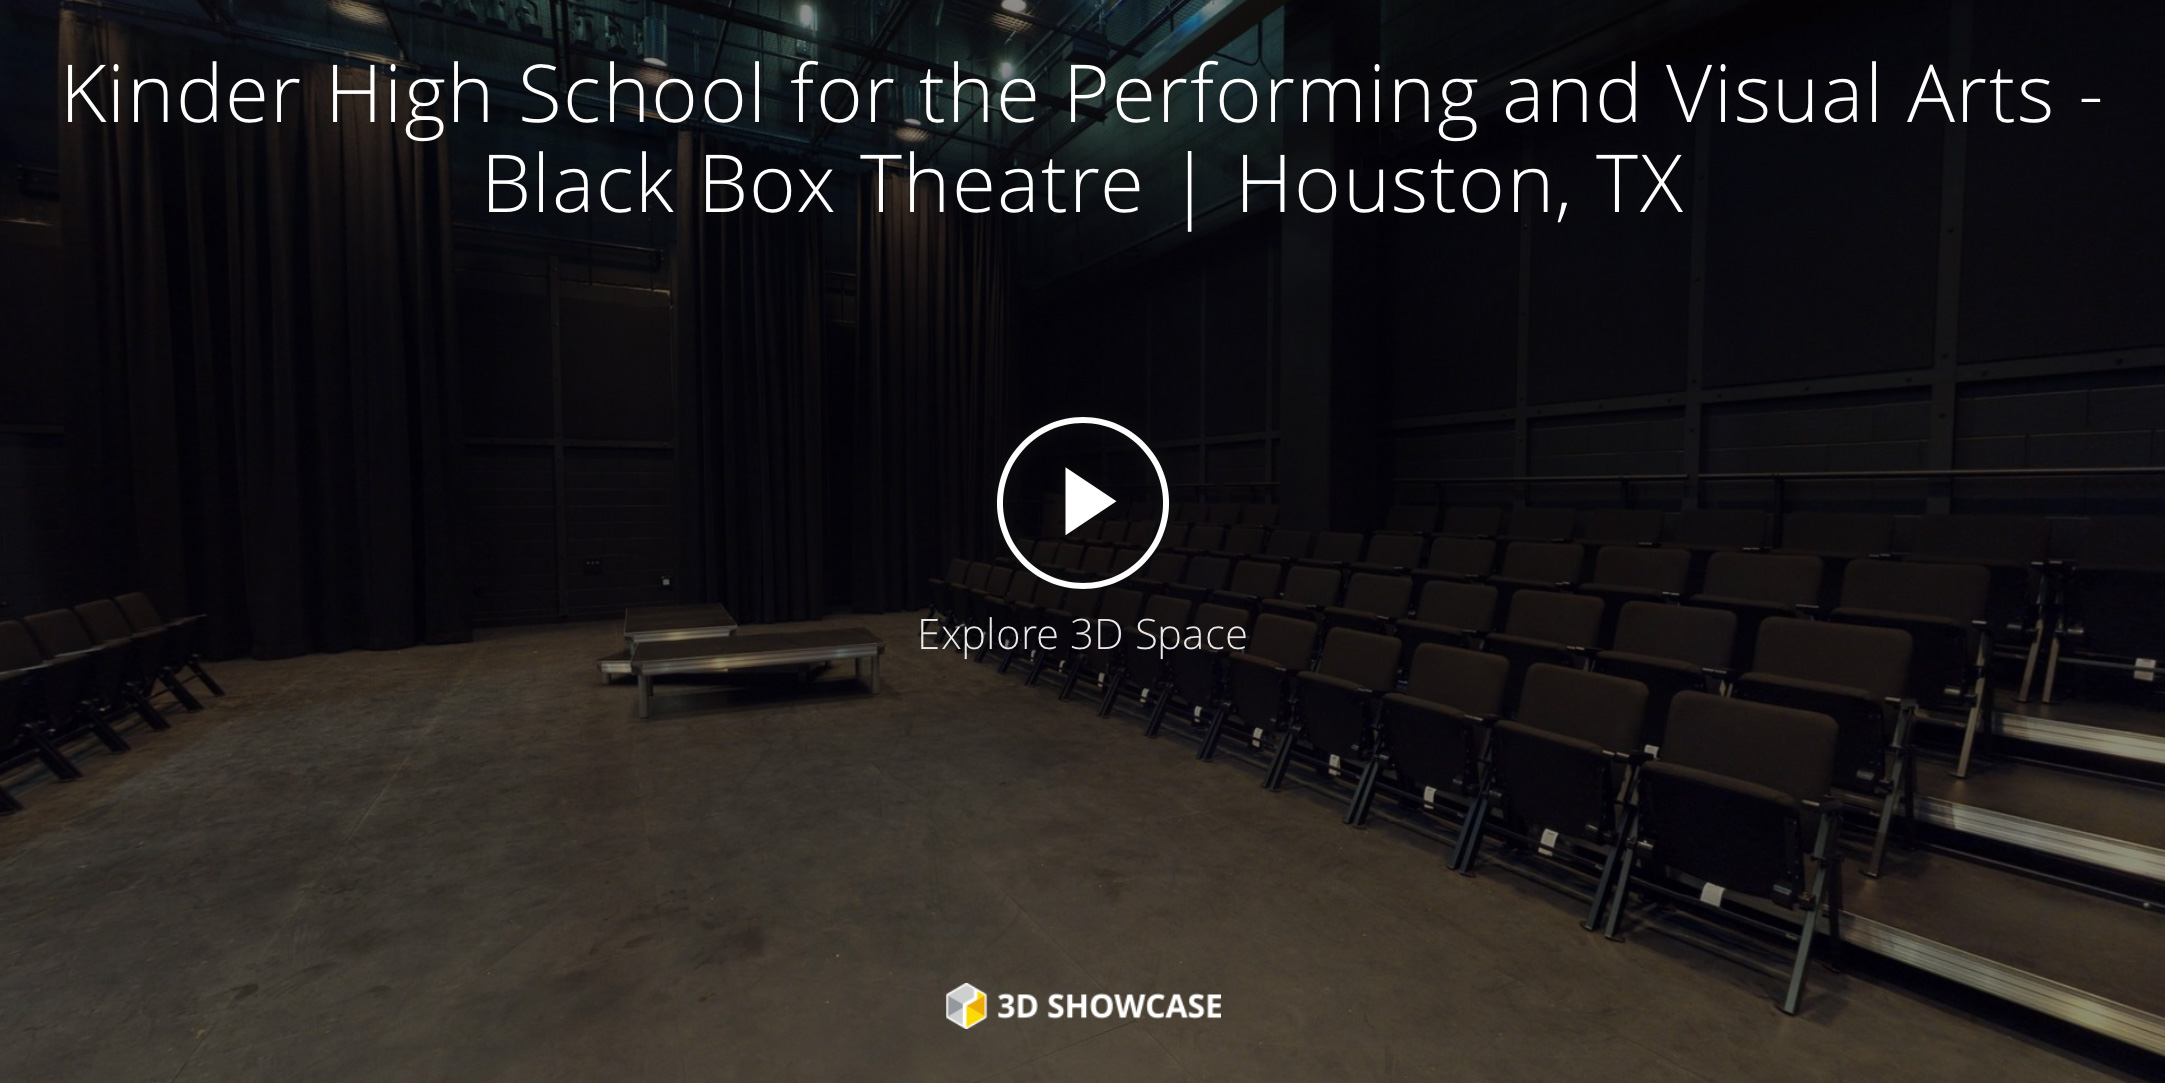 Kinder High School for the Performing and Visual Arts- Black Box Theatre